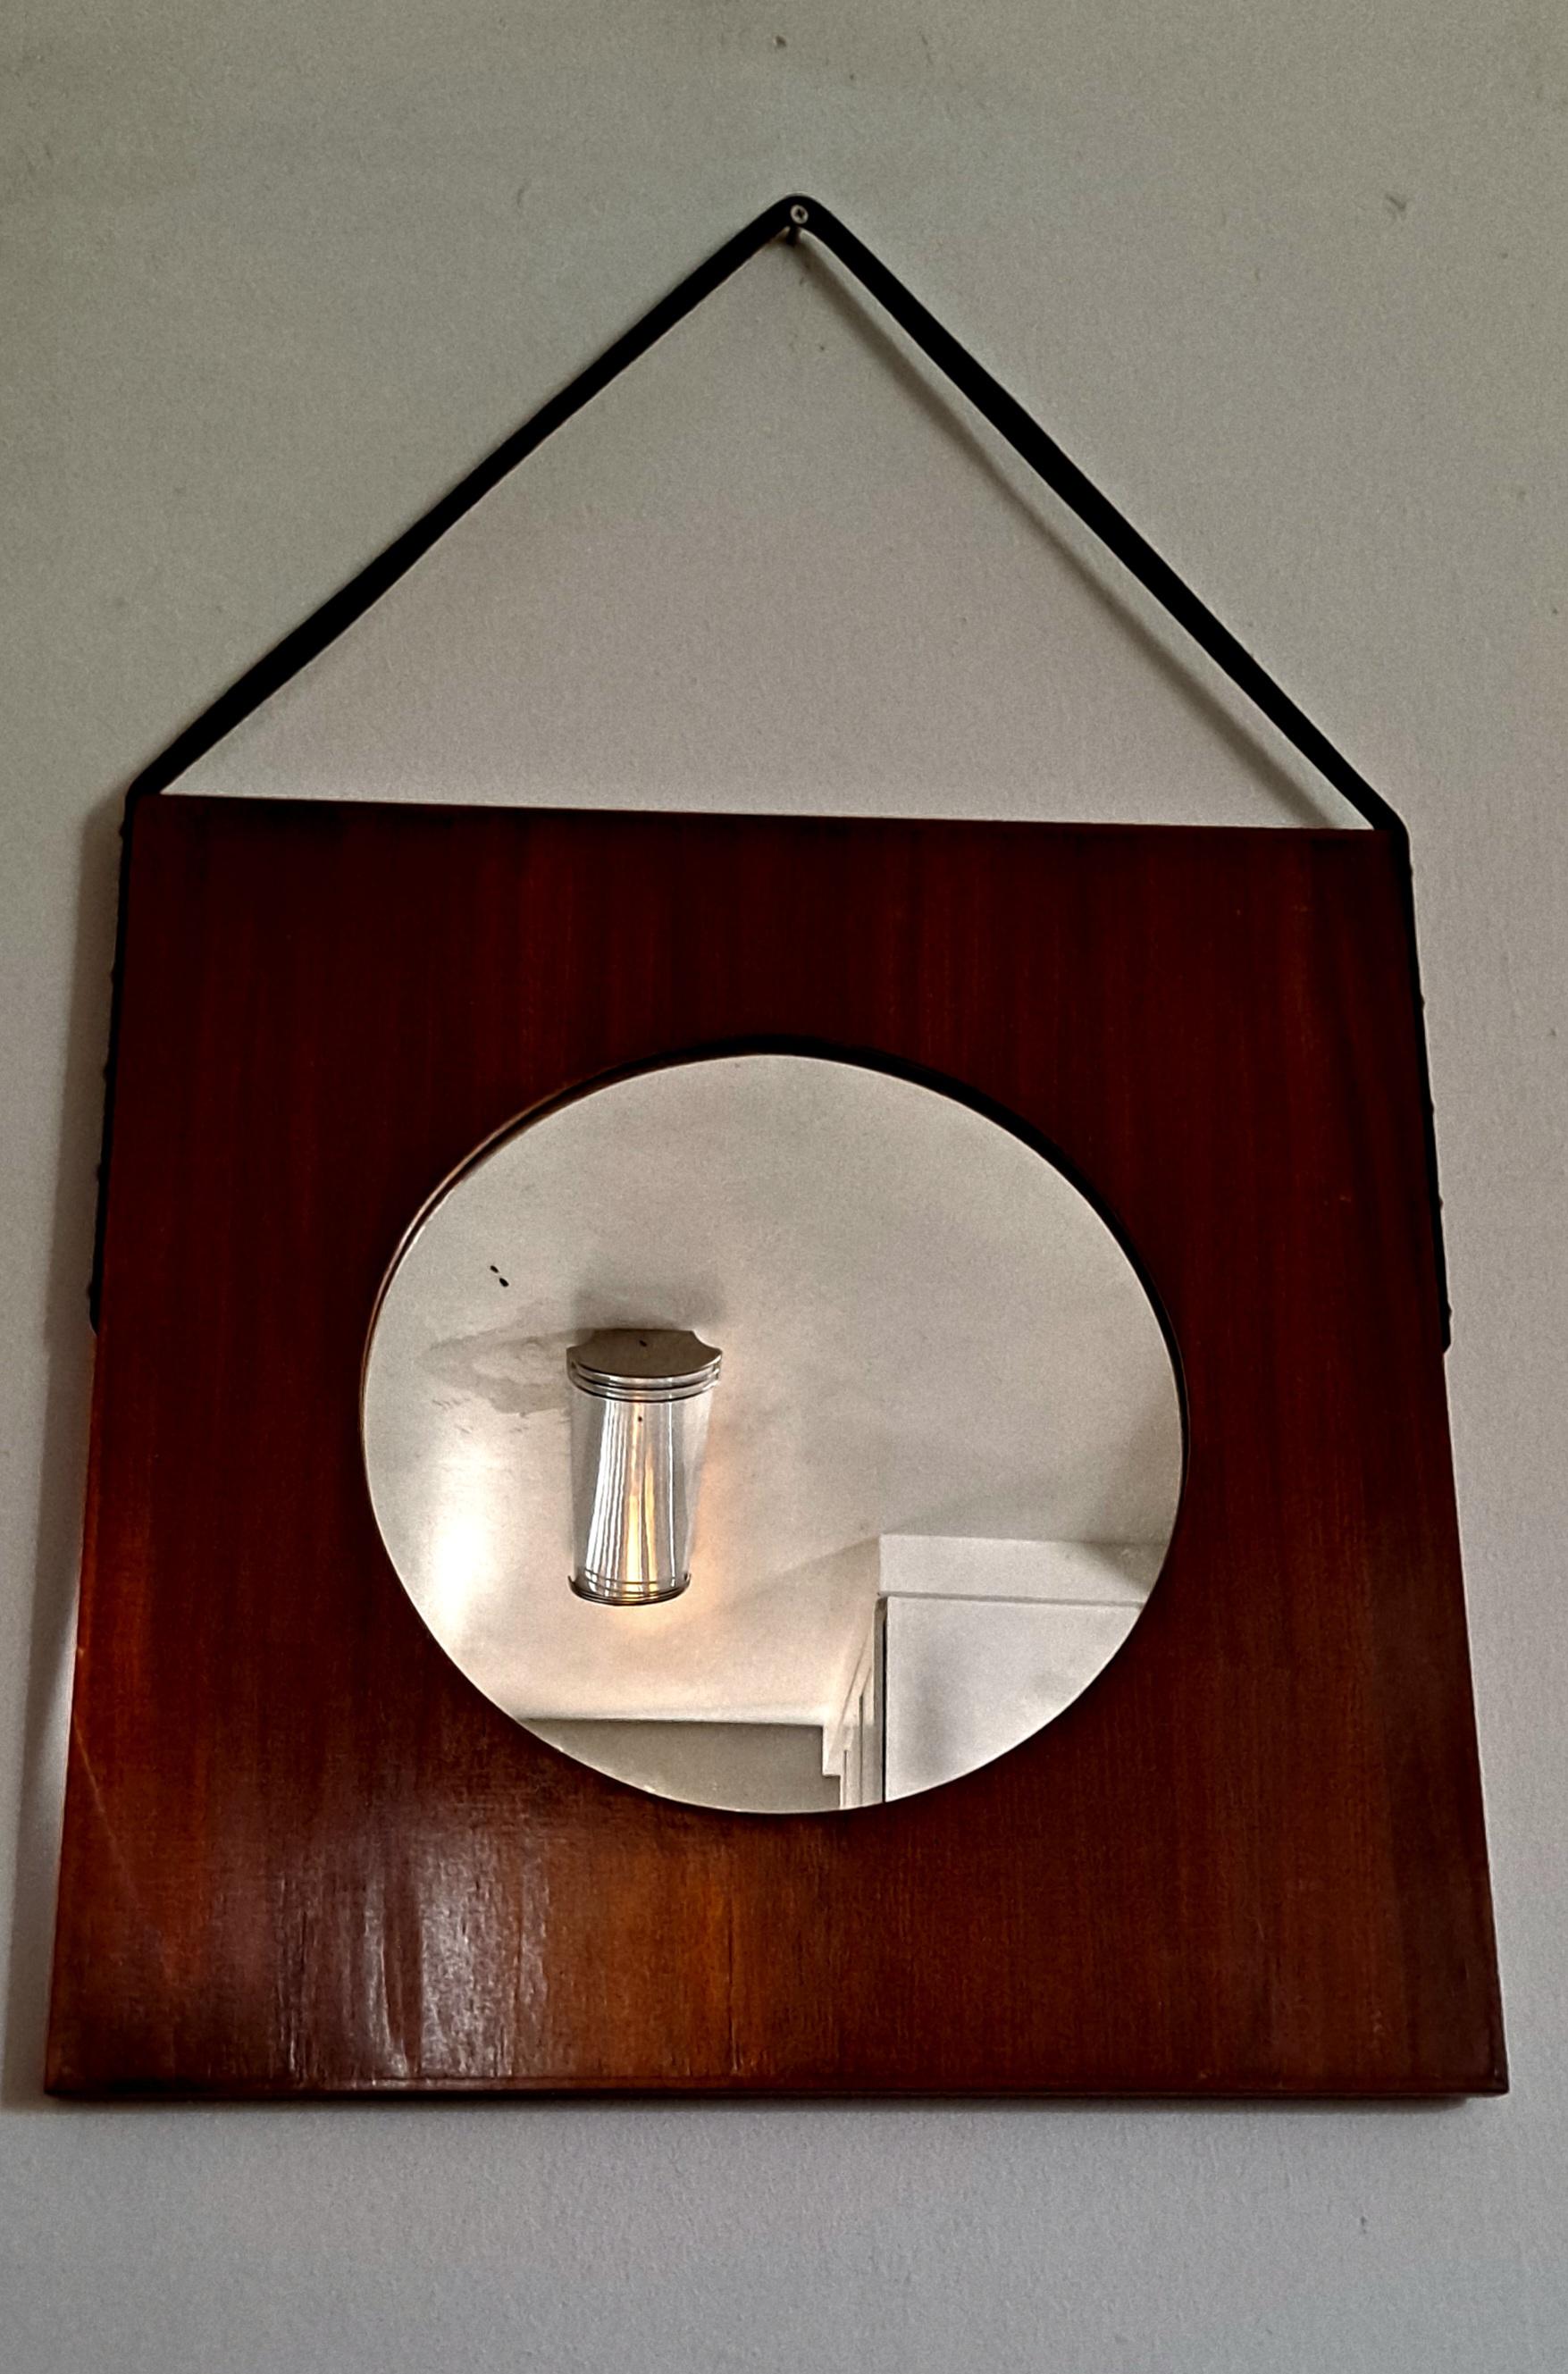  Art Deco wall round mirror with square wood frame .Mirror is hanging on the leather strap. Height with the leather strap is  34 inches. Mirror is tarnish in original condition as shown on the photos .